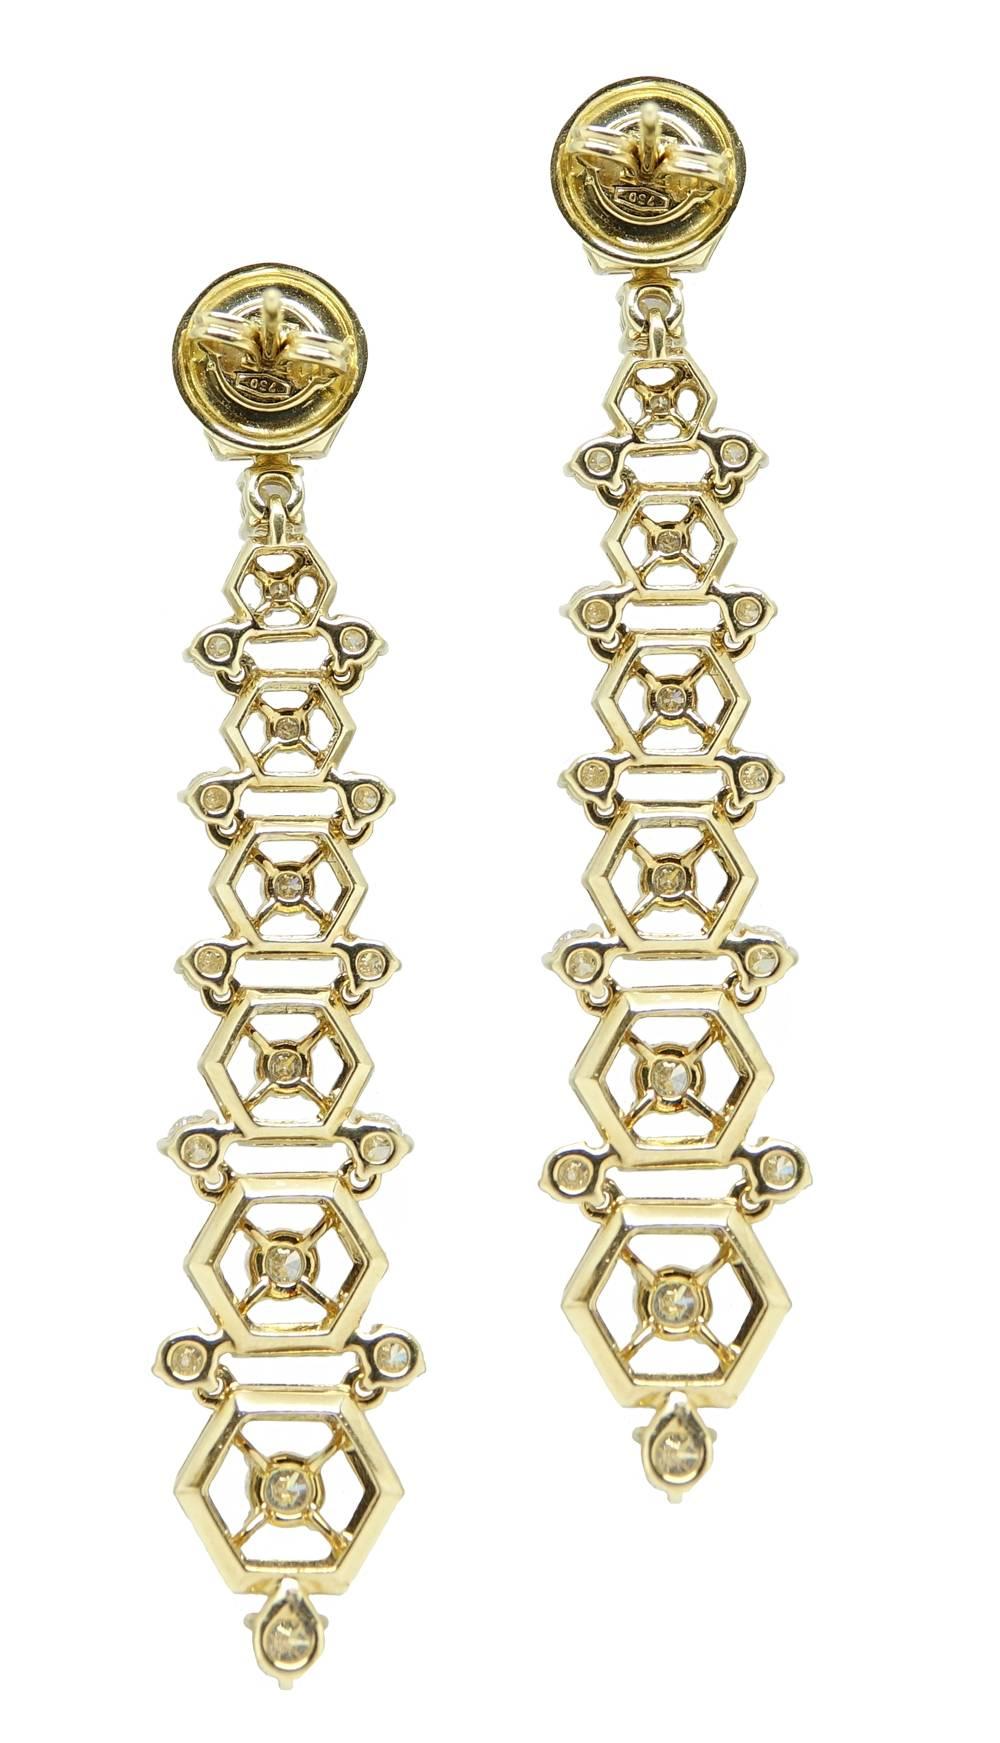 These Elegant 18K Yellow Gold Maria Canale Dangle Earrings Are Beyond Beautiful. 38 Total Round Prong Set Diamonds Adds The Perfect Touch Of Sparkle and Weigh A Total Carat Weight Of 3.10 Carats. These Lovely Earrings Are 2.5 Inches In Length.